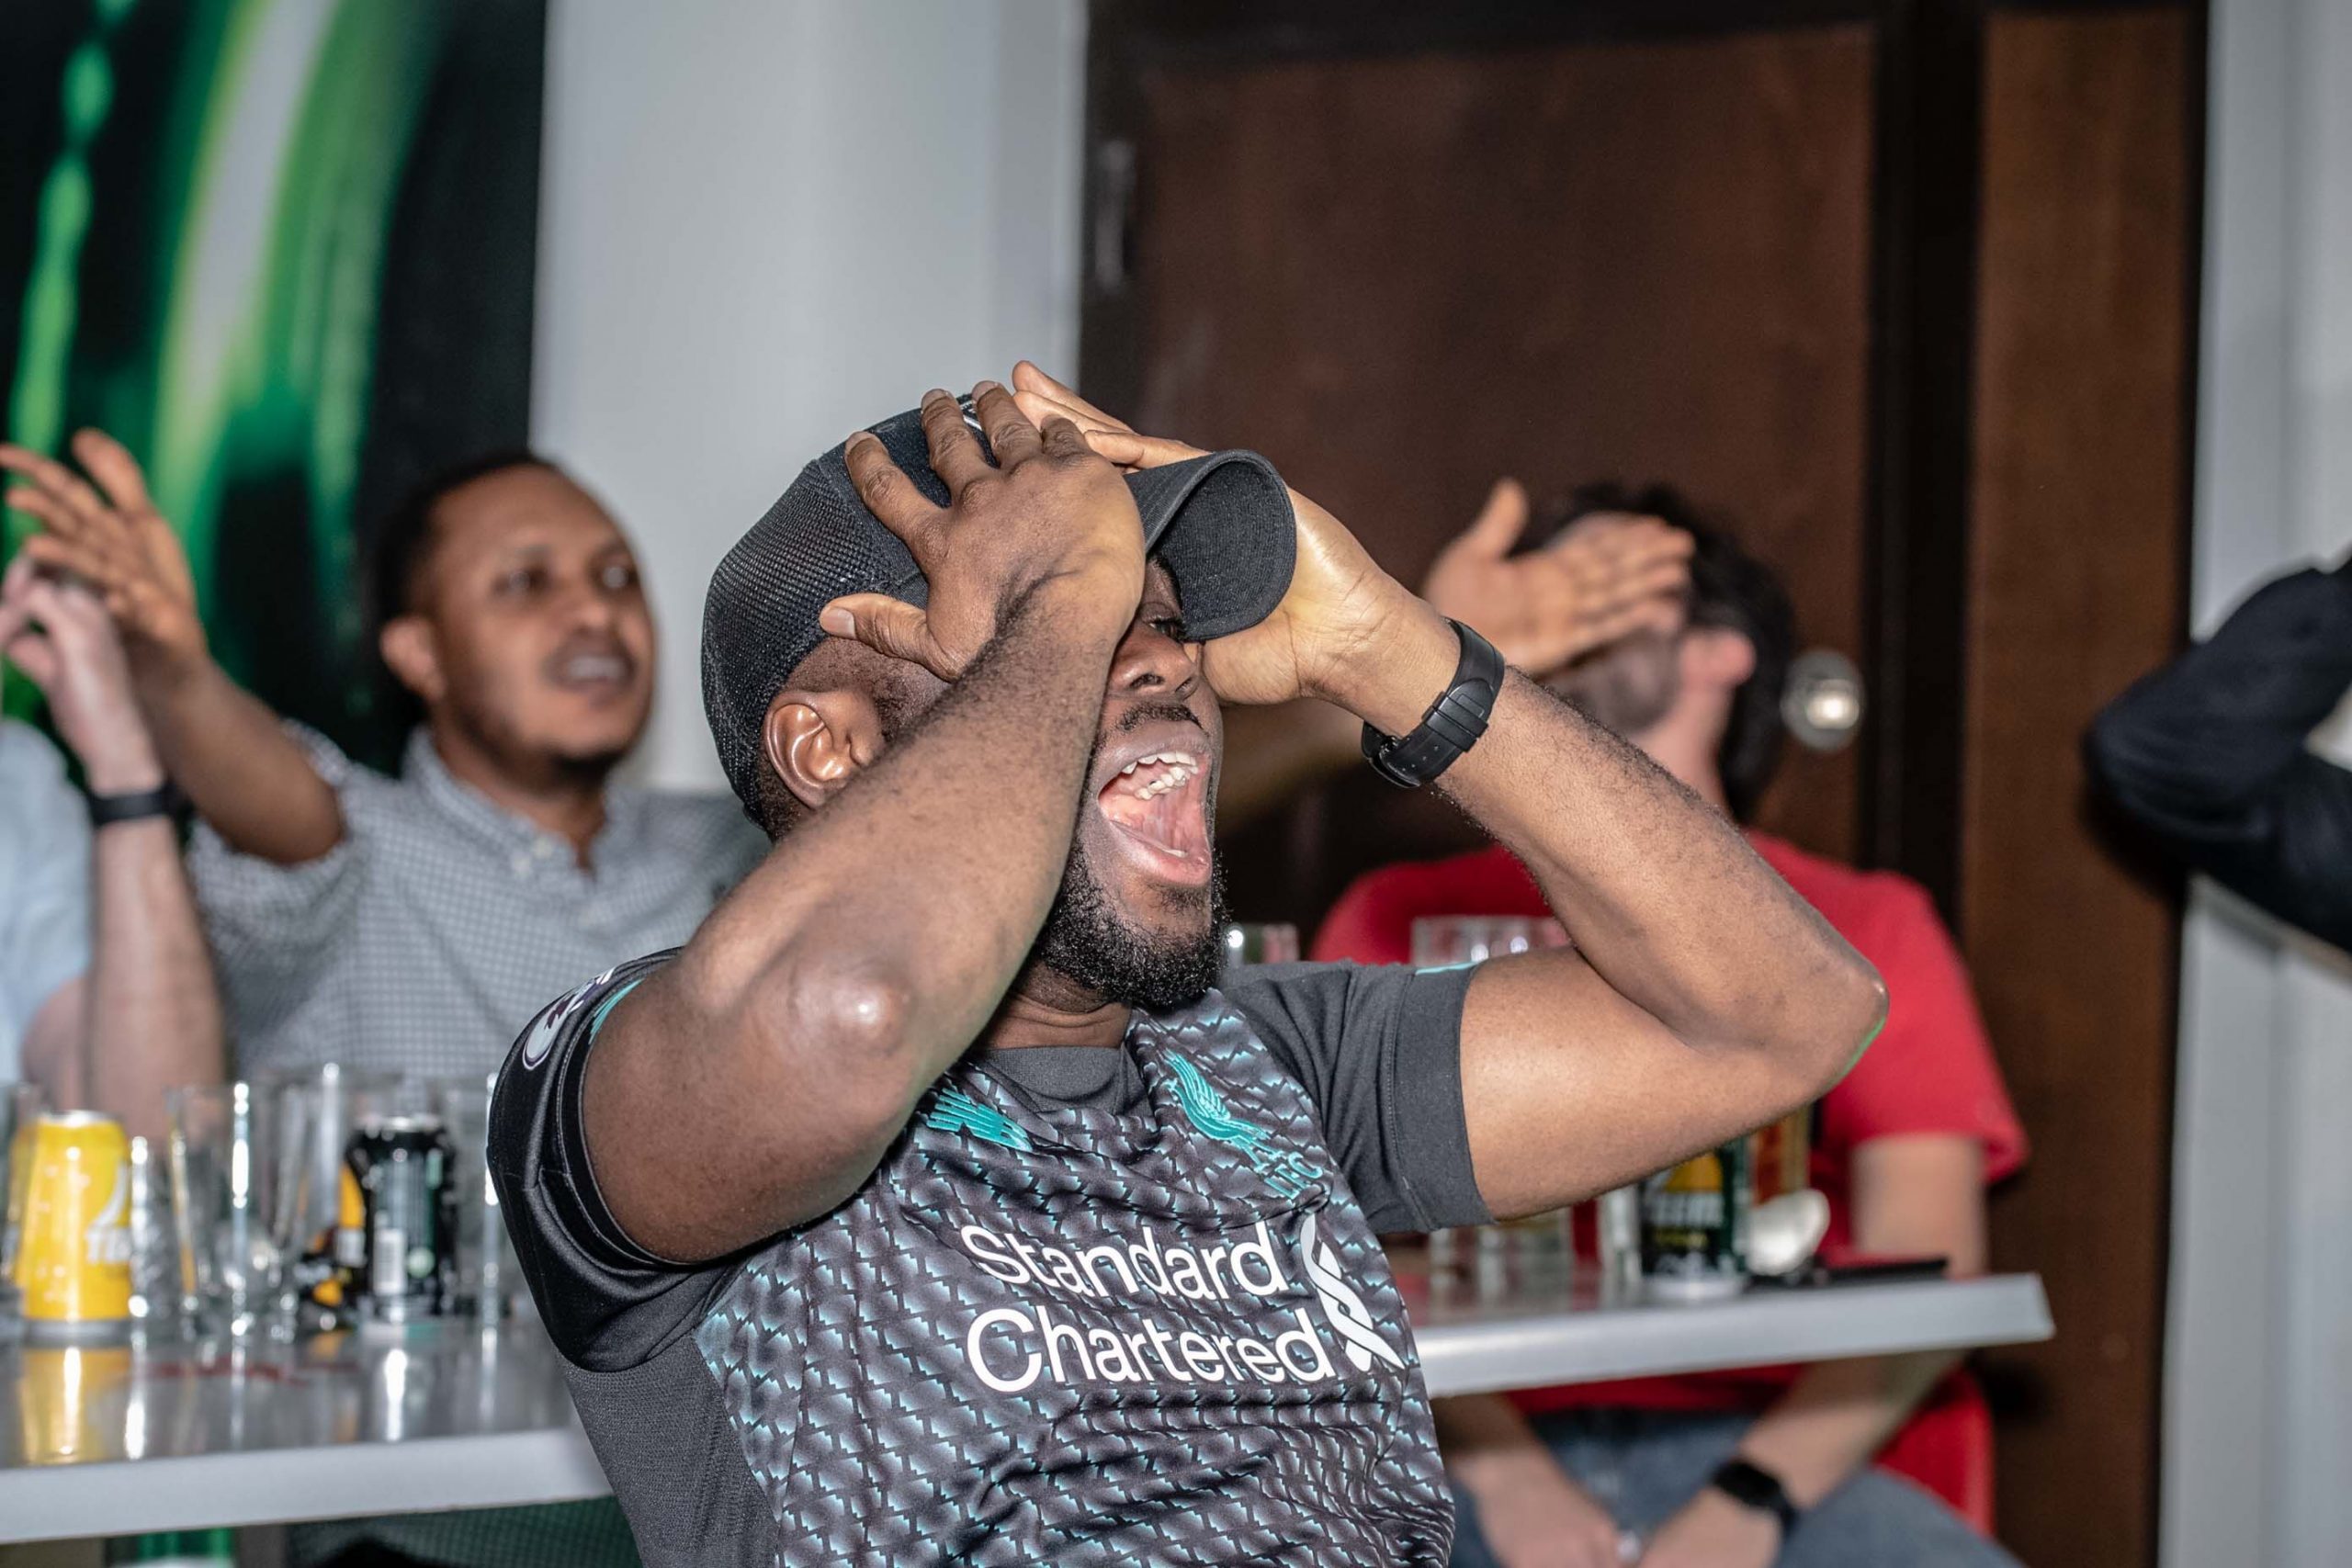 Football Fans Treated To Amazing Night Of Football At The Heineken House